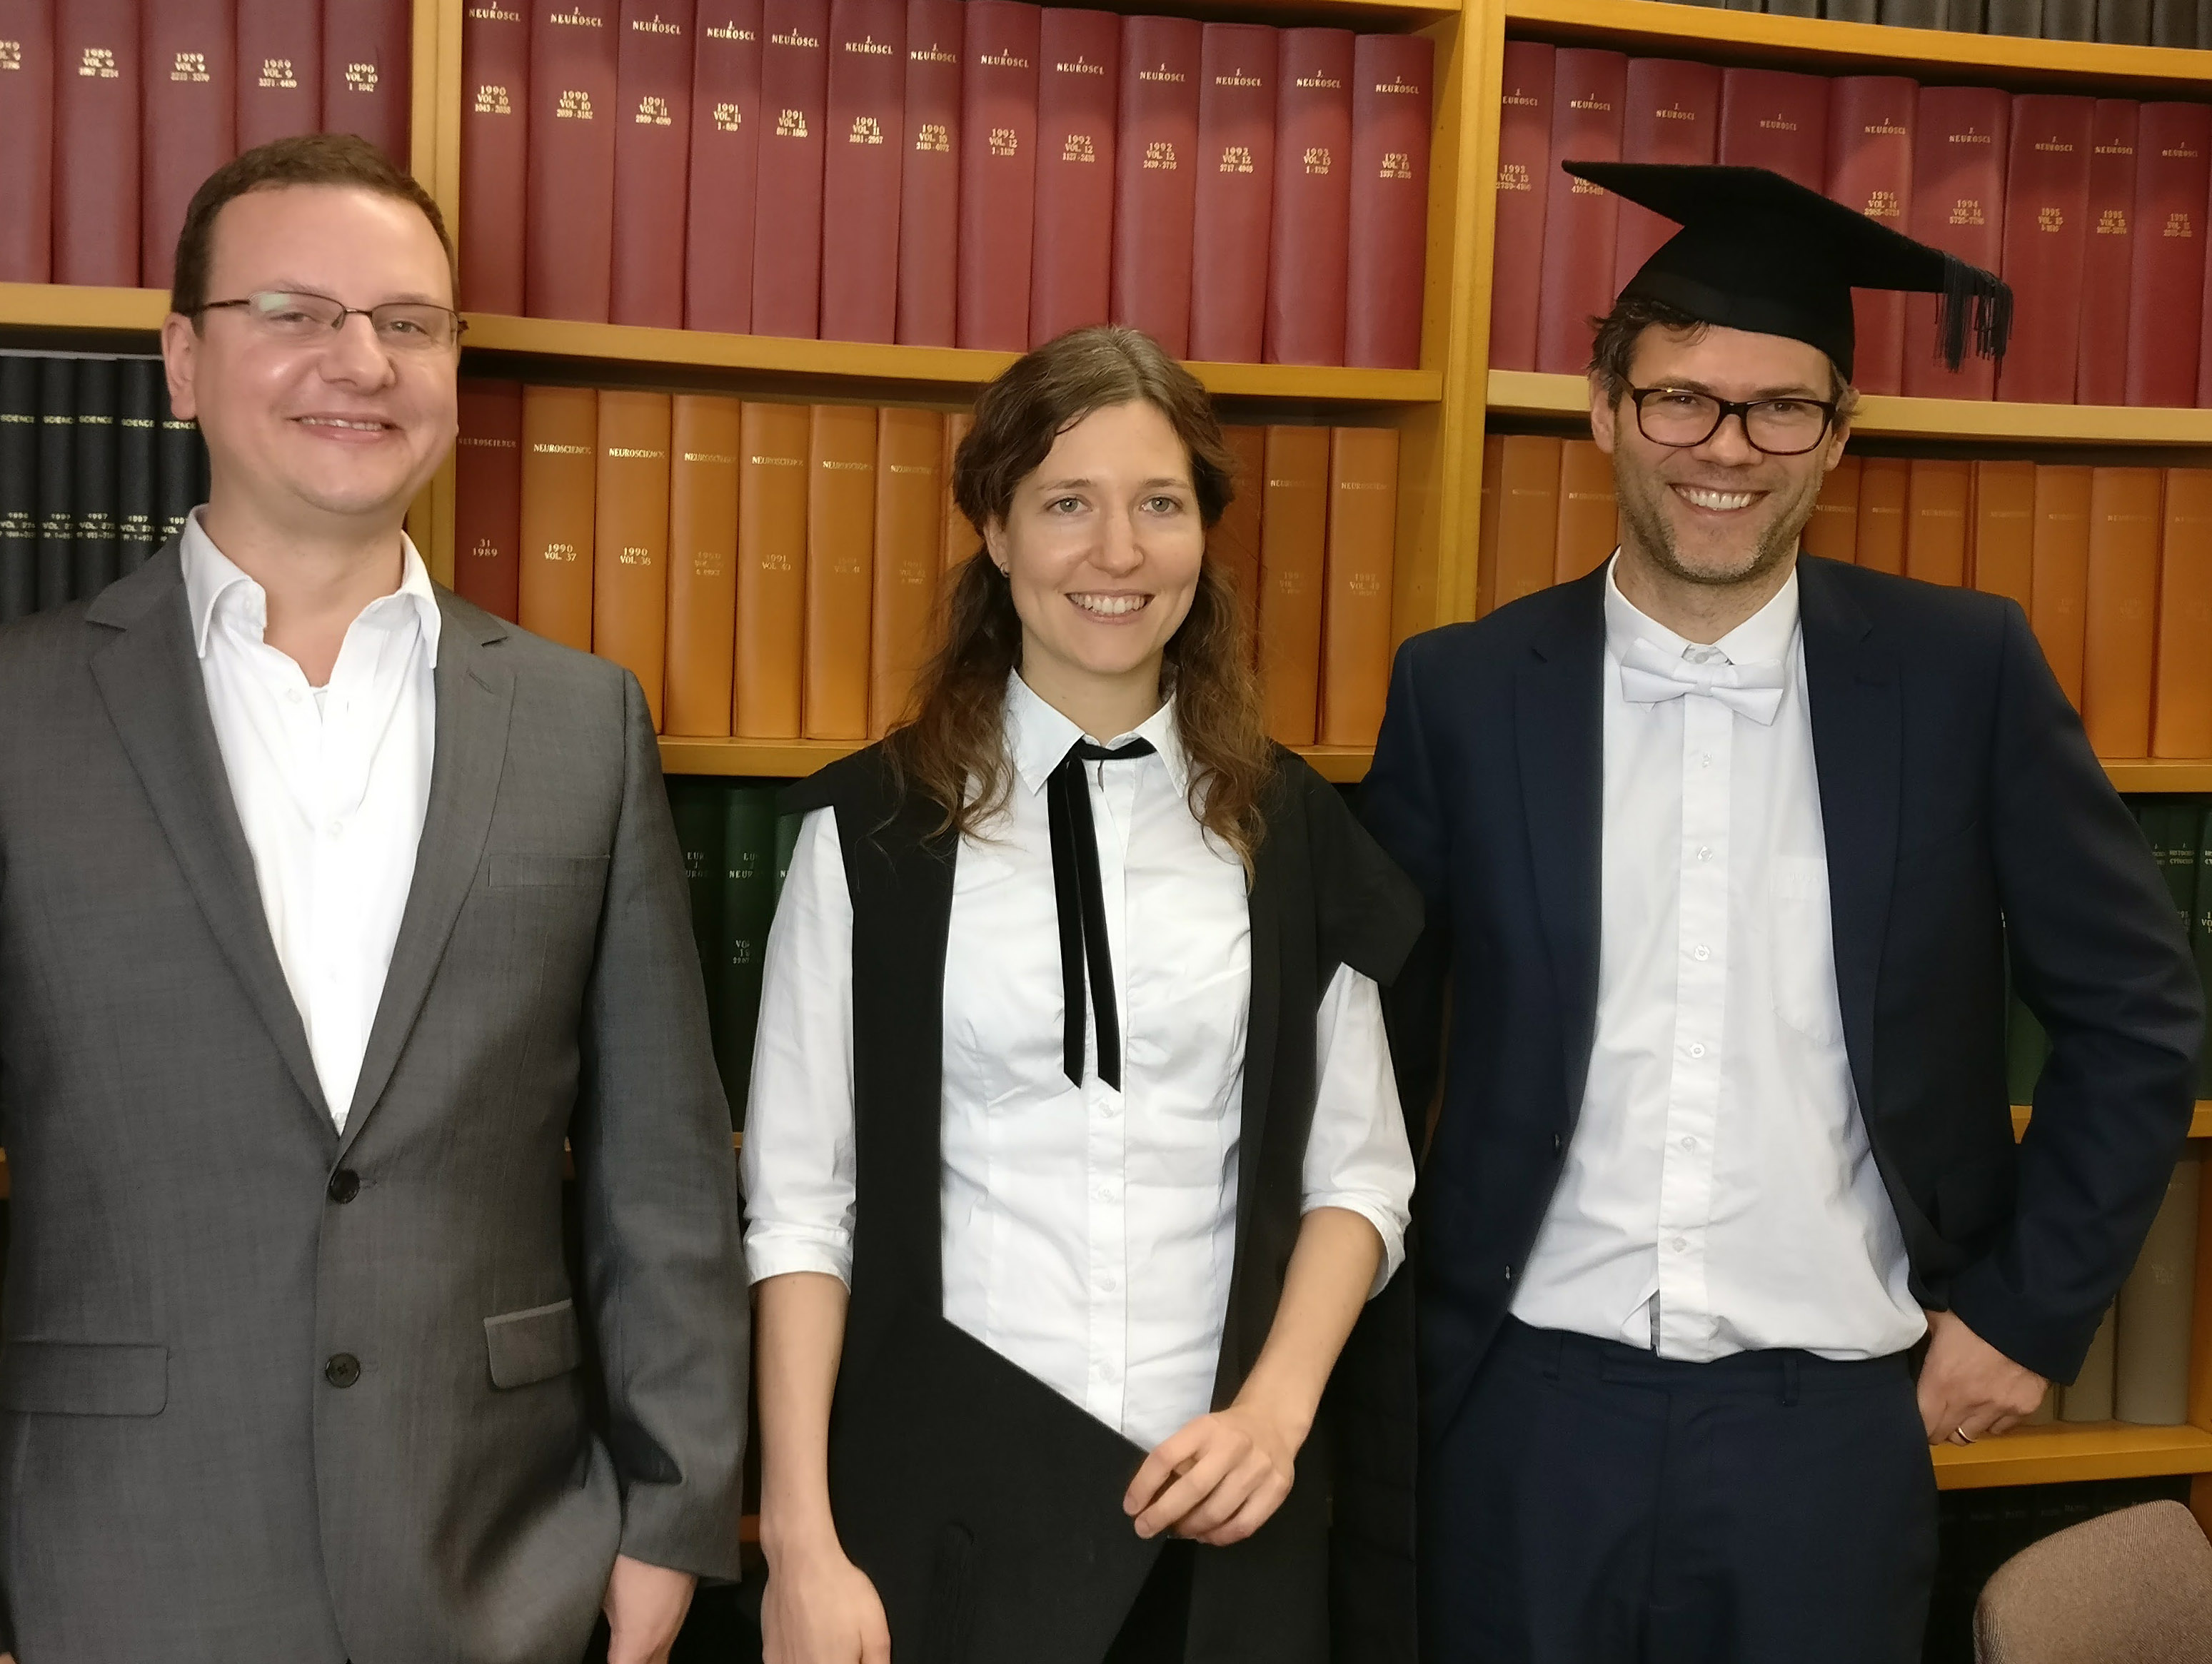 Petra Fischer successfully defends her D.Phil. thesis